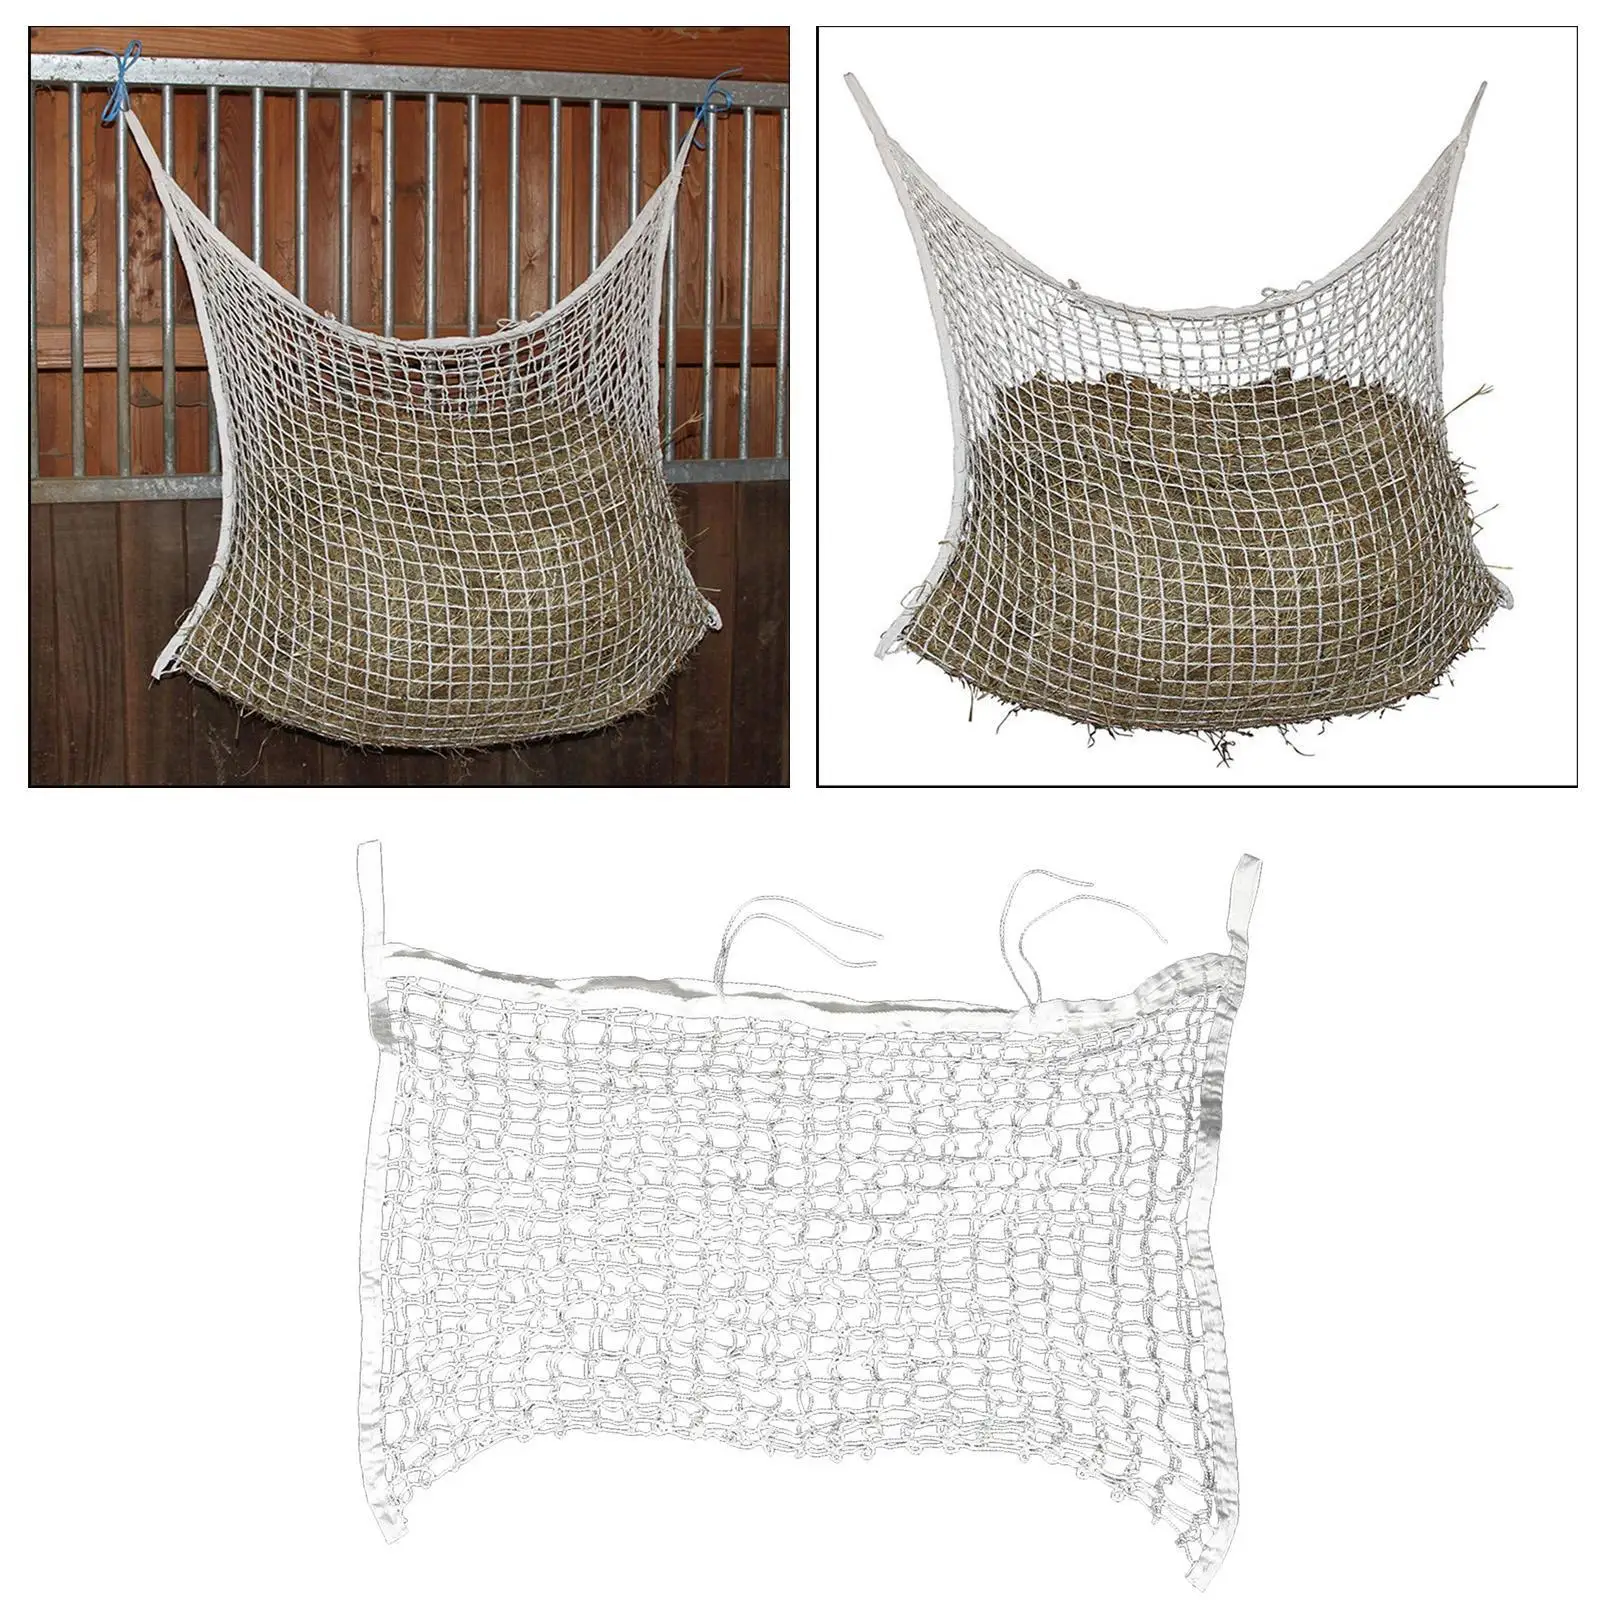  slow feed Horse Hay Net Bag Large Capacity Feed Mesh Straw Bag with Holes